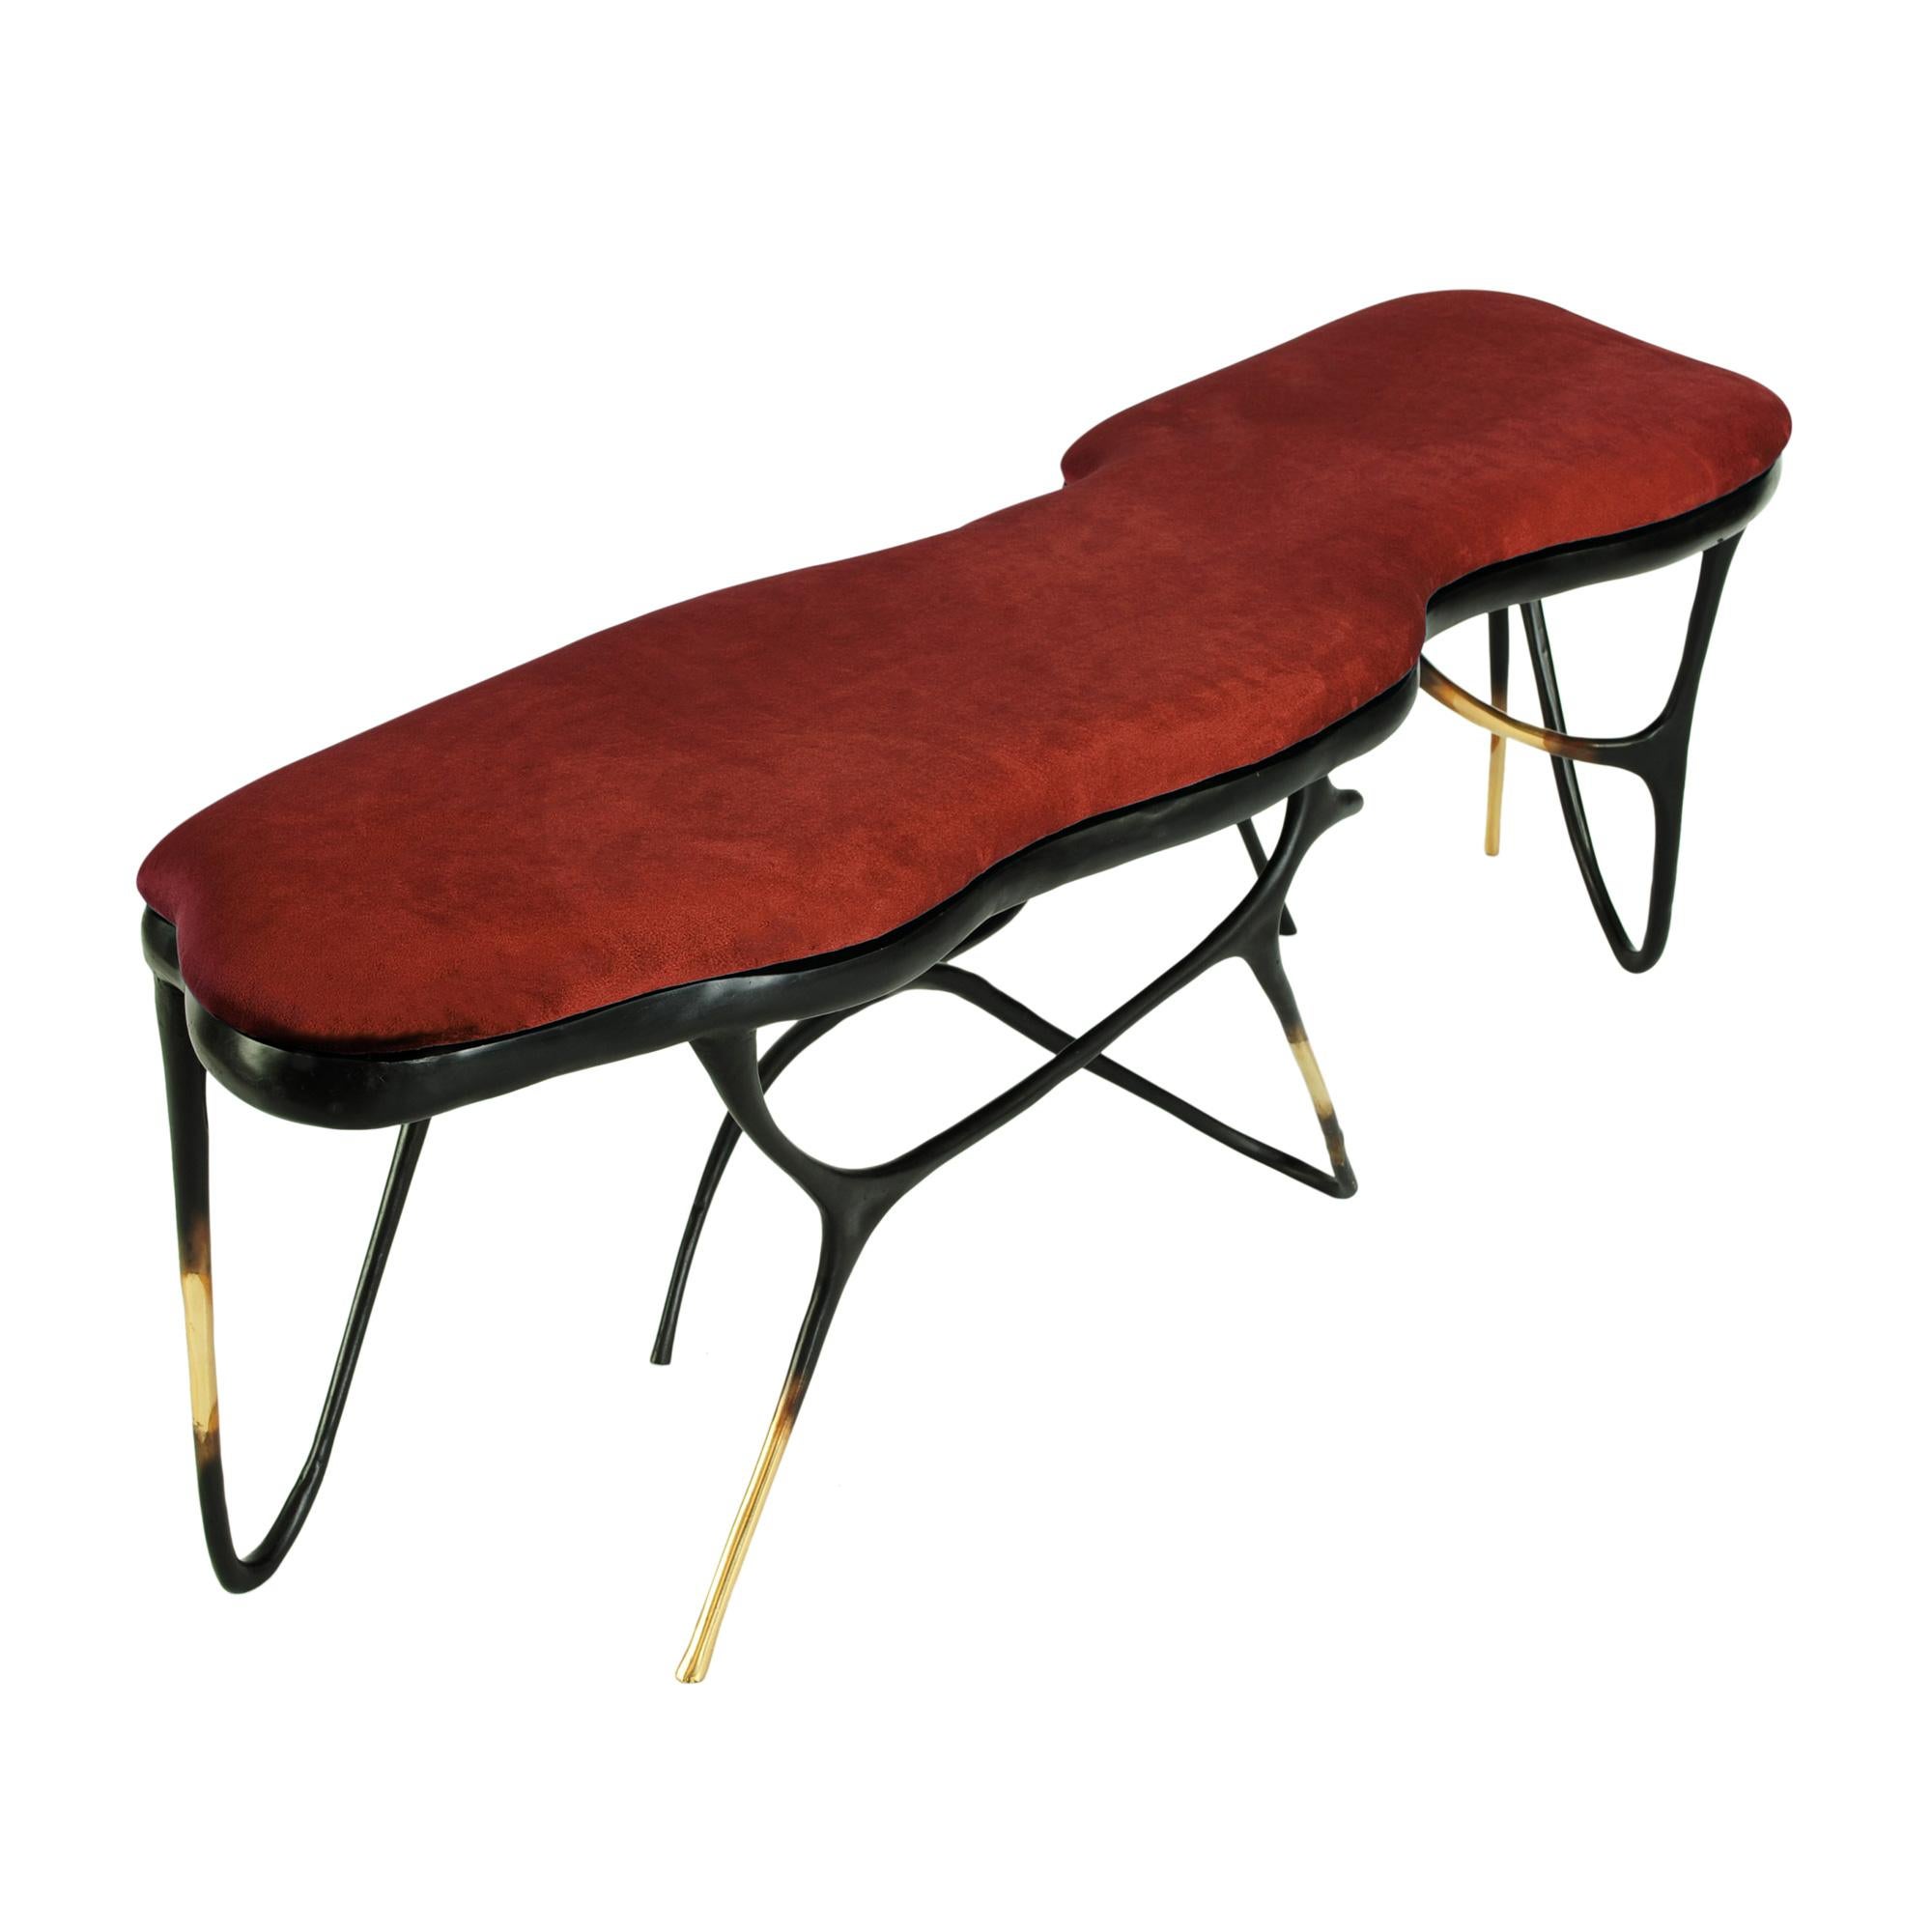 Elegant bronze bench with upholstered seat.
Can be customized to your specifications or COM.